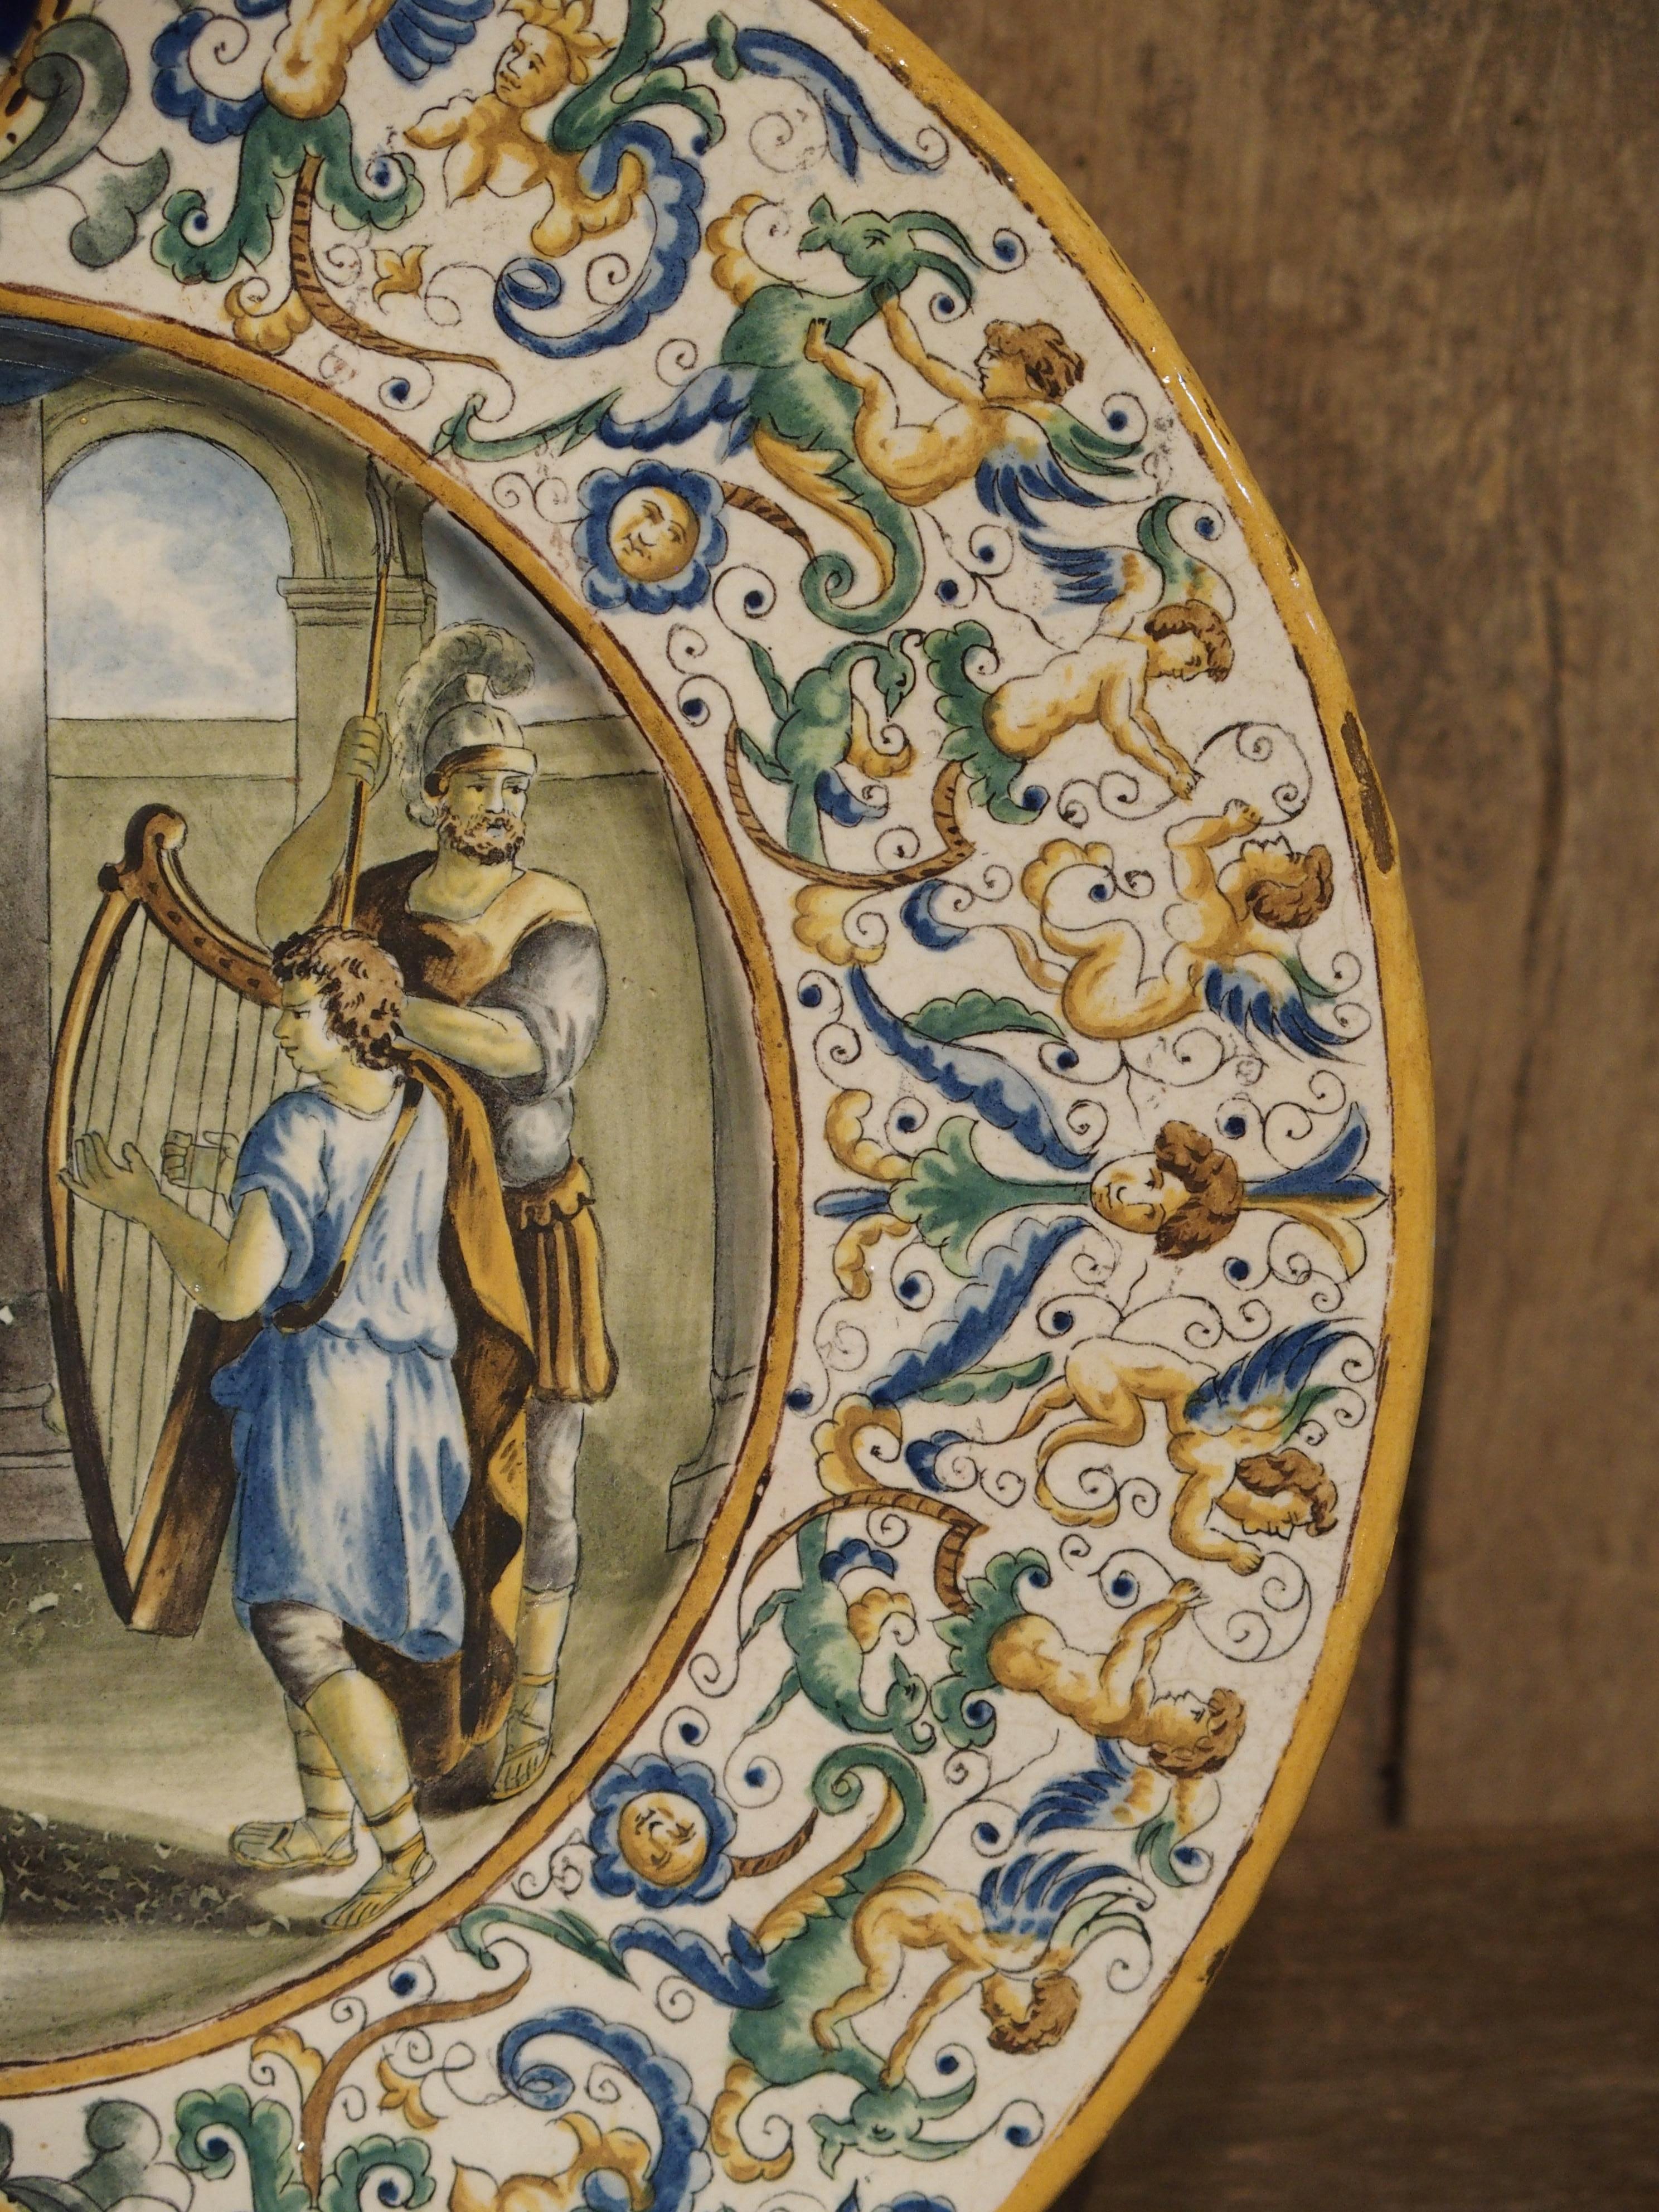 19th Century Hand Painted Majolica Platter from Italy For Sale 3